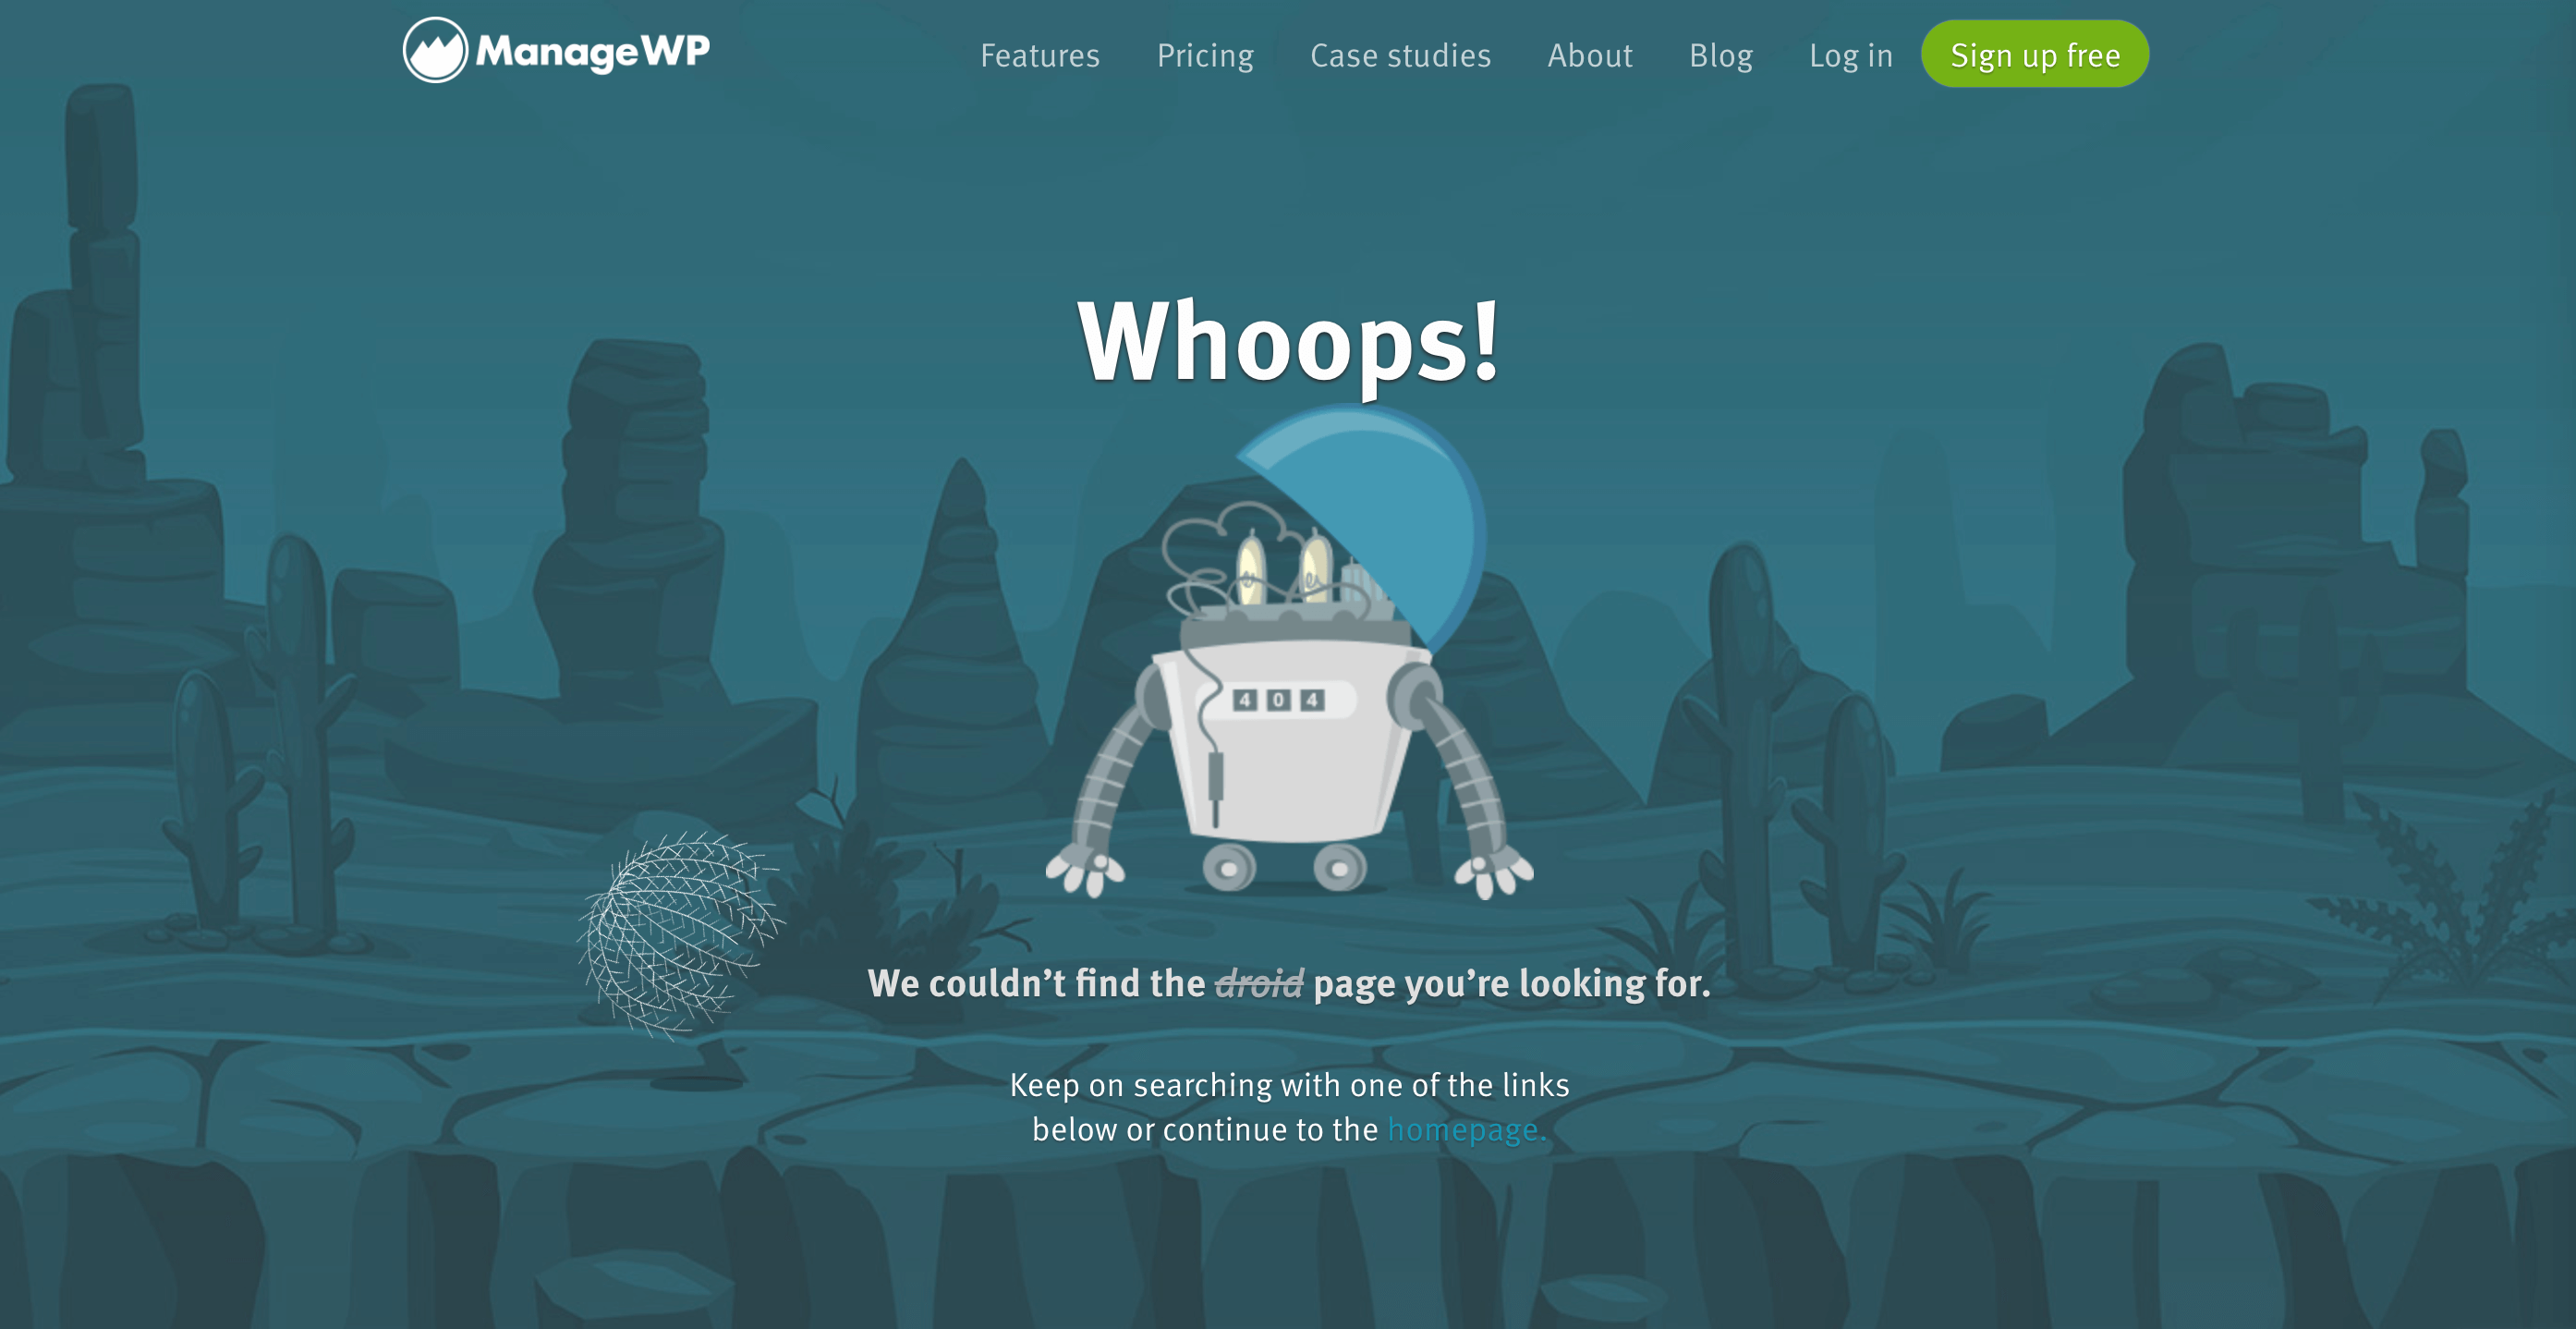 The ManageWP 404 error page.